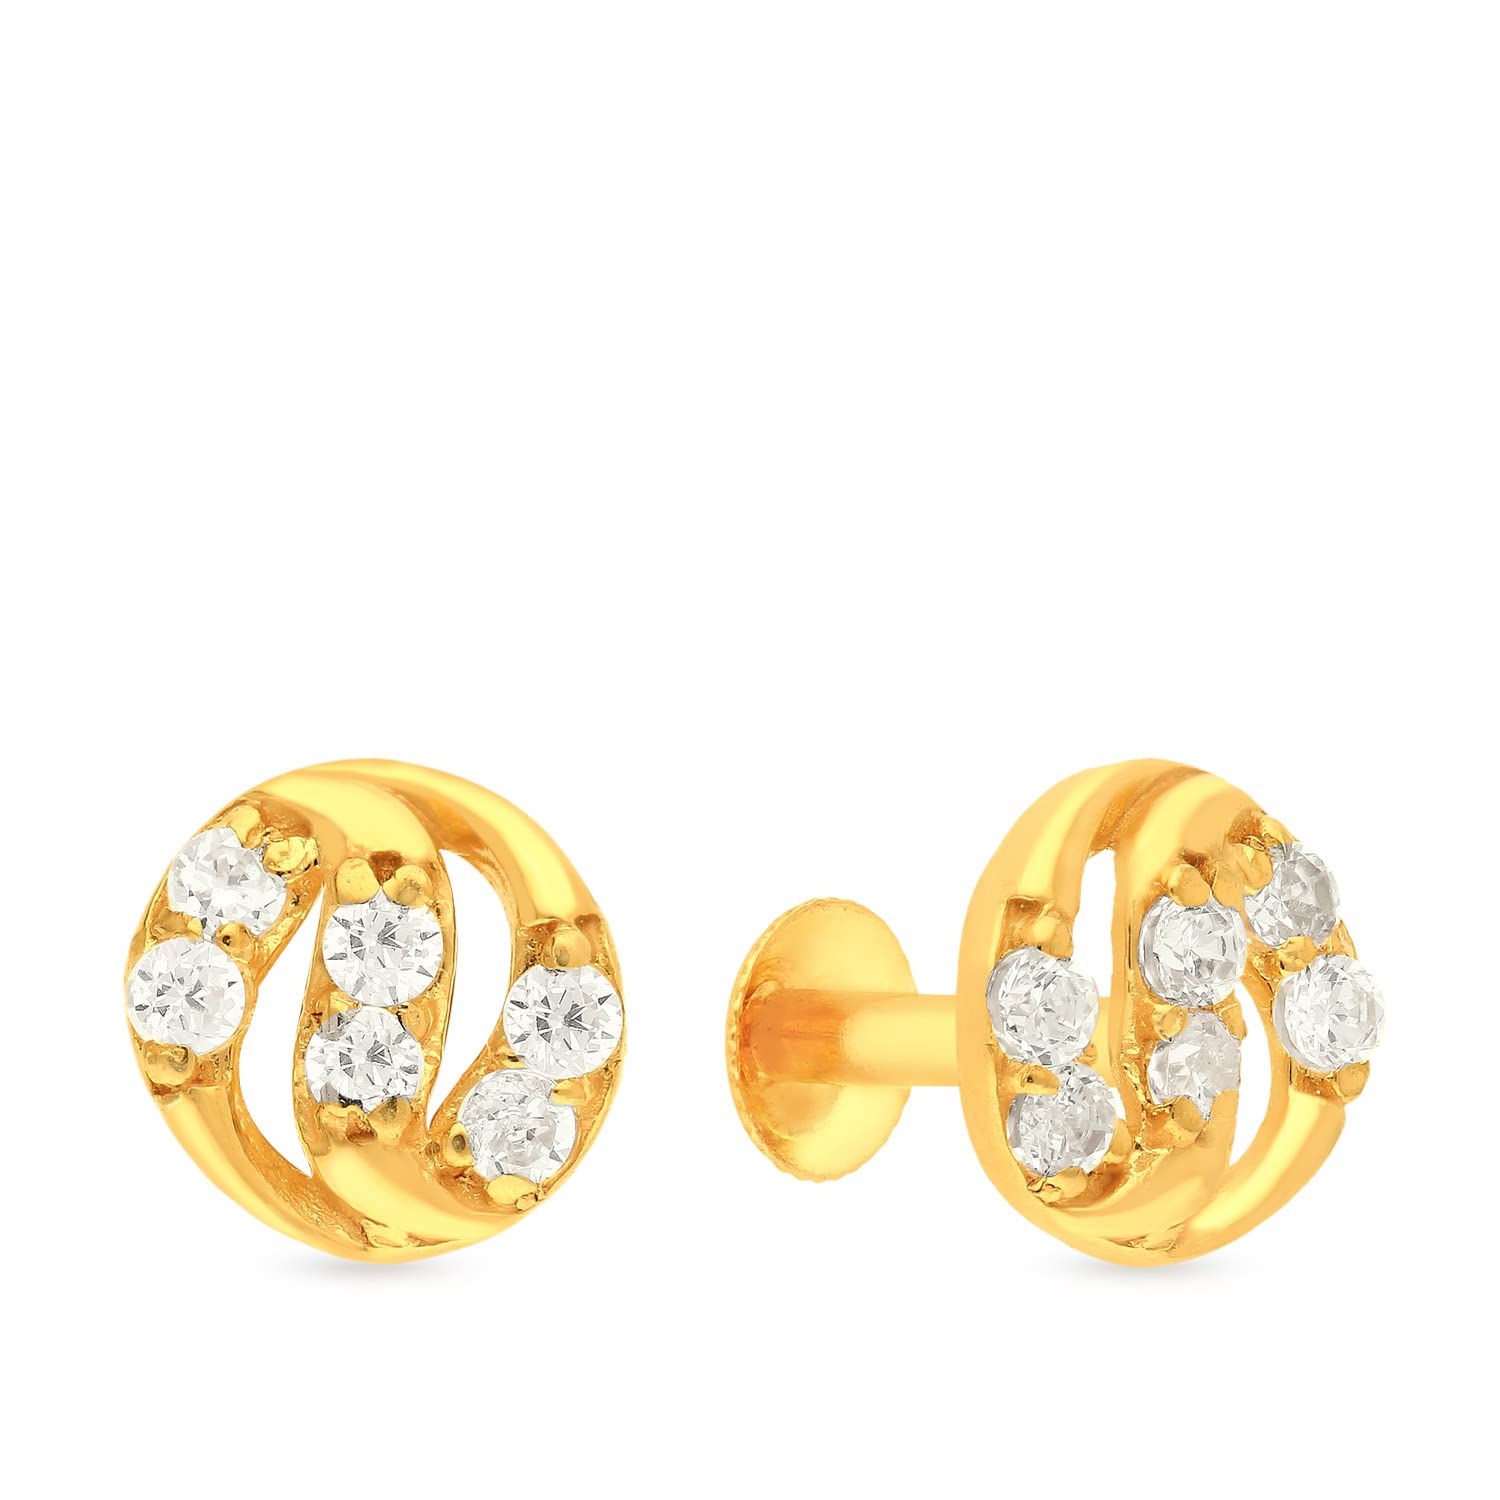 22K Gold Earrings for Women with Ruby - 1-GER13015 in 4.500 Grams